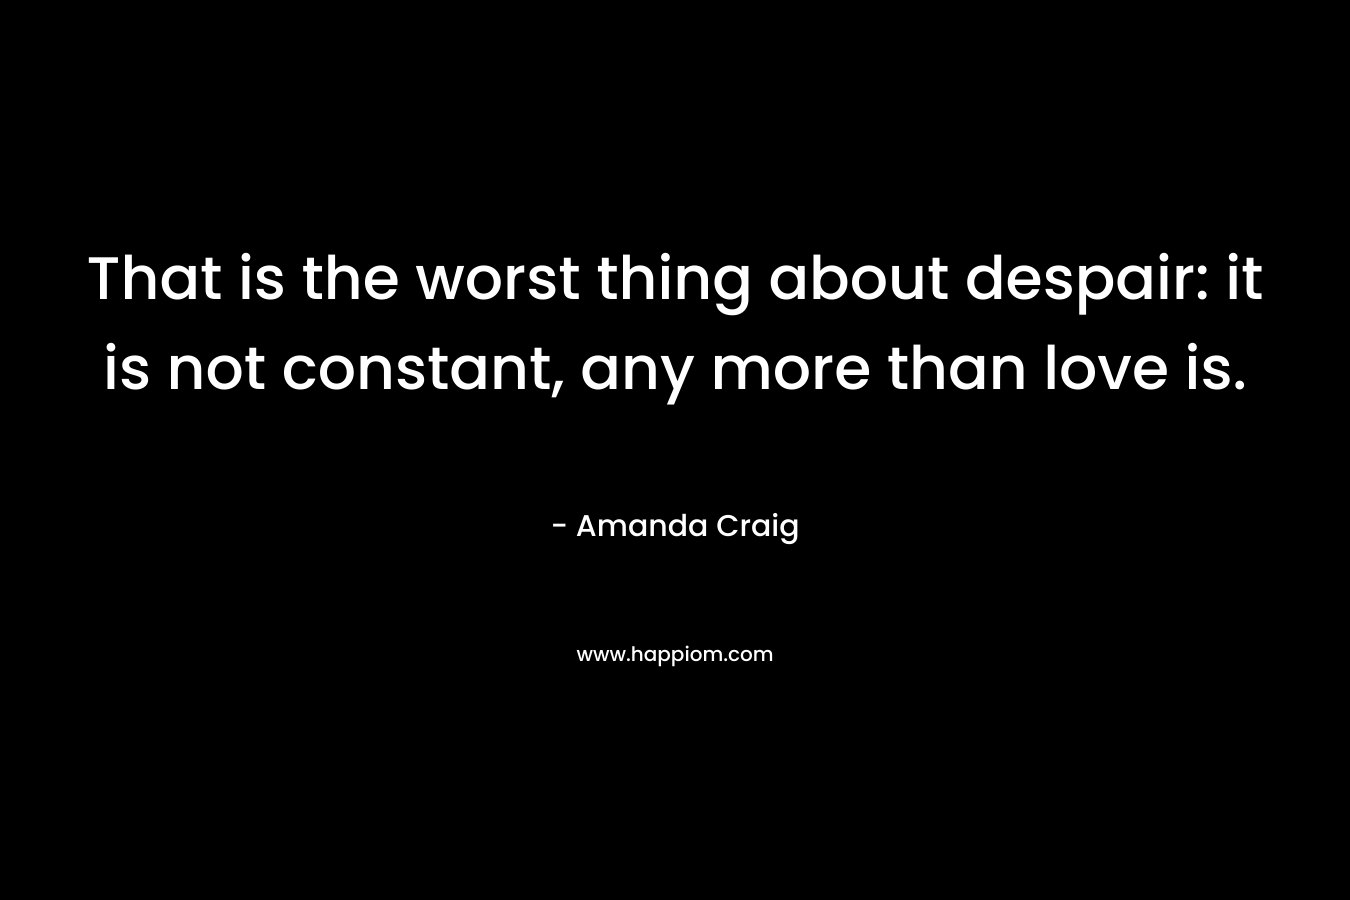 That is the worst thing about despair: it is not constant, any more than love is. – Amanda Craig